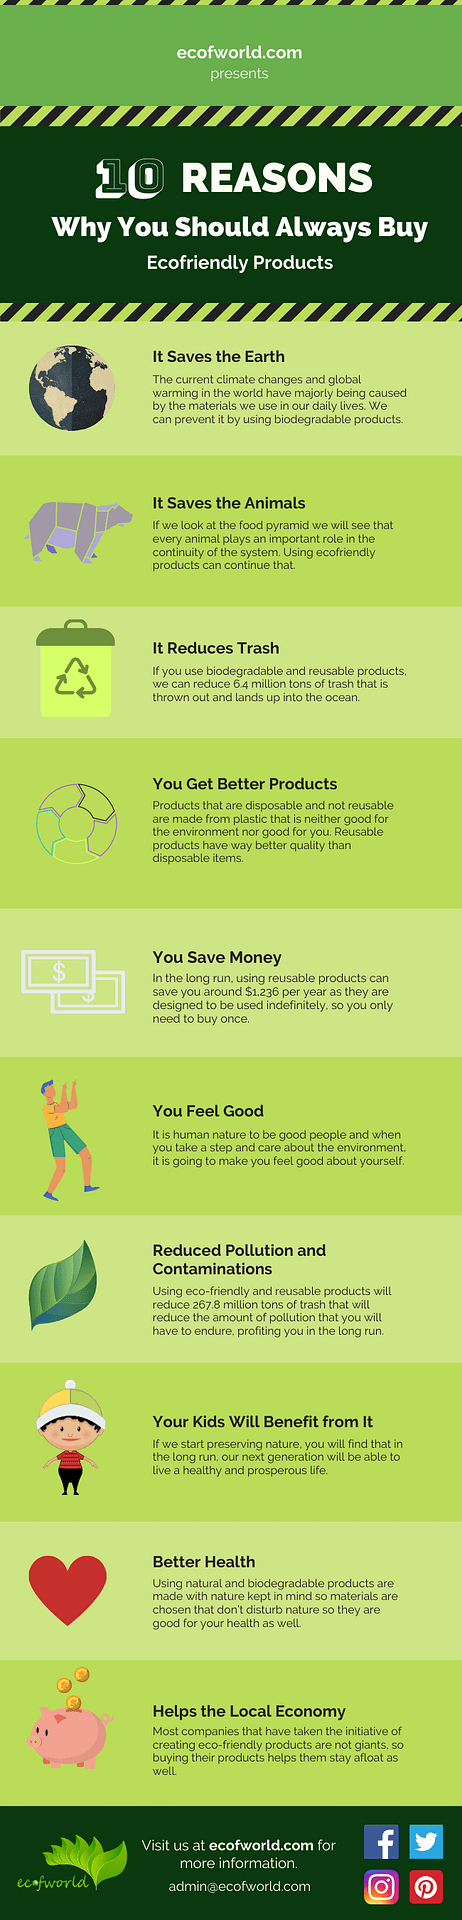 ecofworld - 10 reasons people should buy eco friendly products